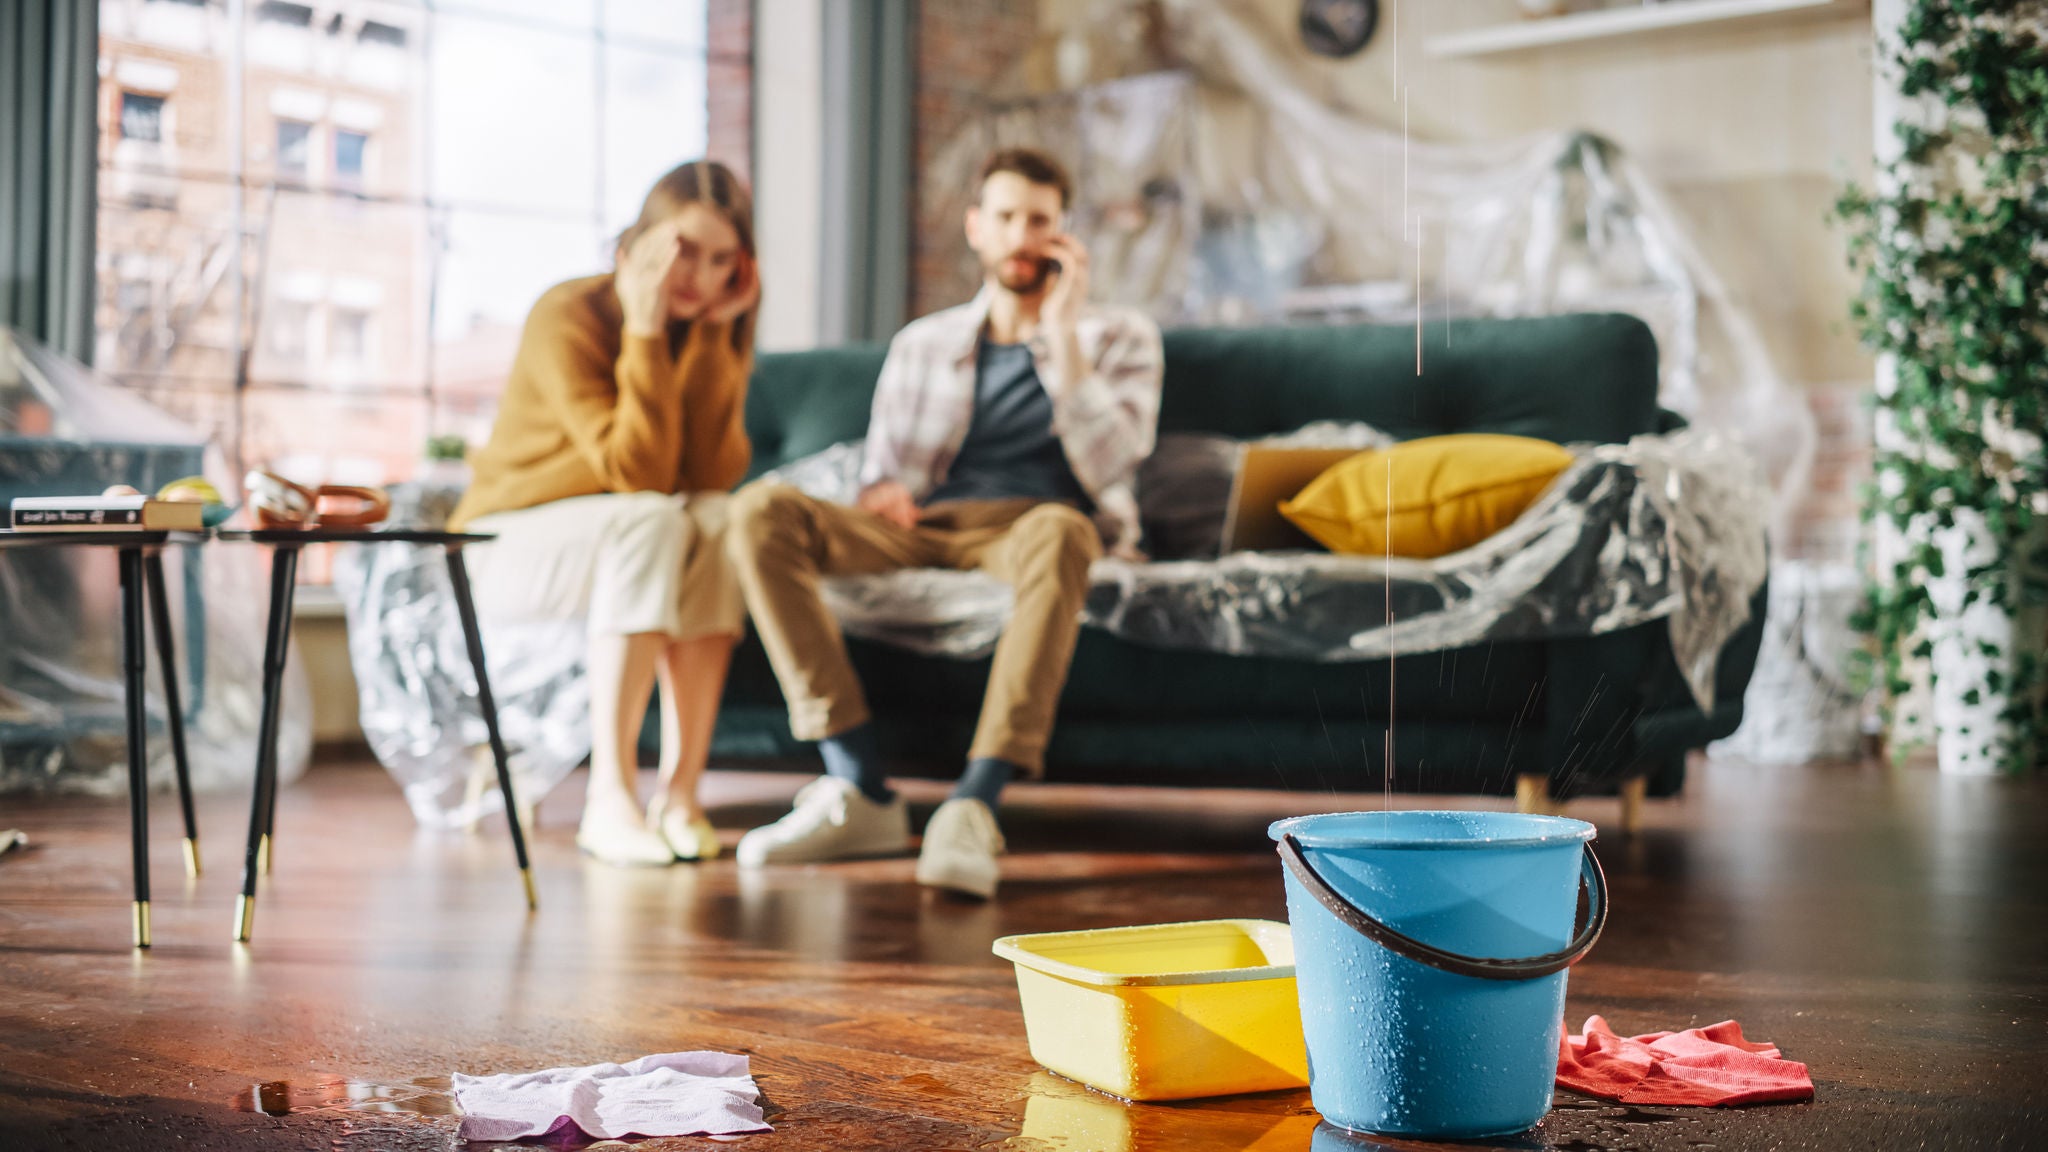 Roof is Leaking or Pipe Rupture at Home: Panicing Couple In Despair Sitting on a Sofa Watching How Water Drips into Buckets in their Living Room. Catastrophe, Distaster and Financial Ruin